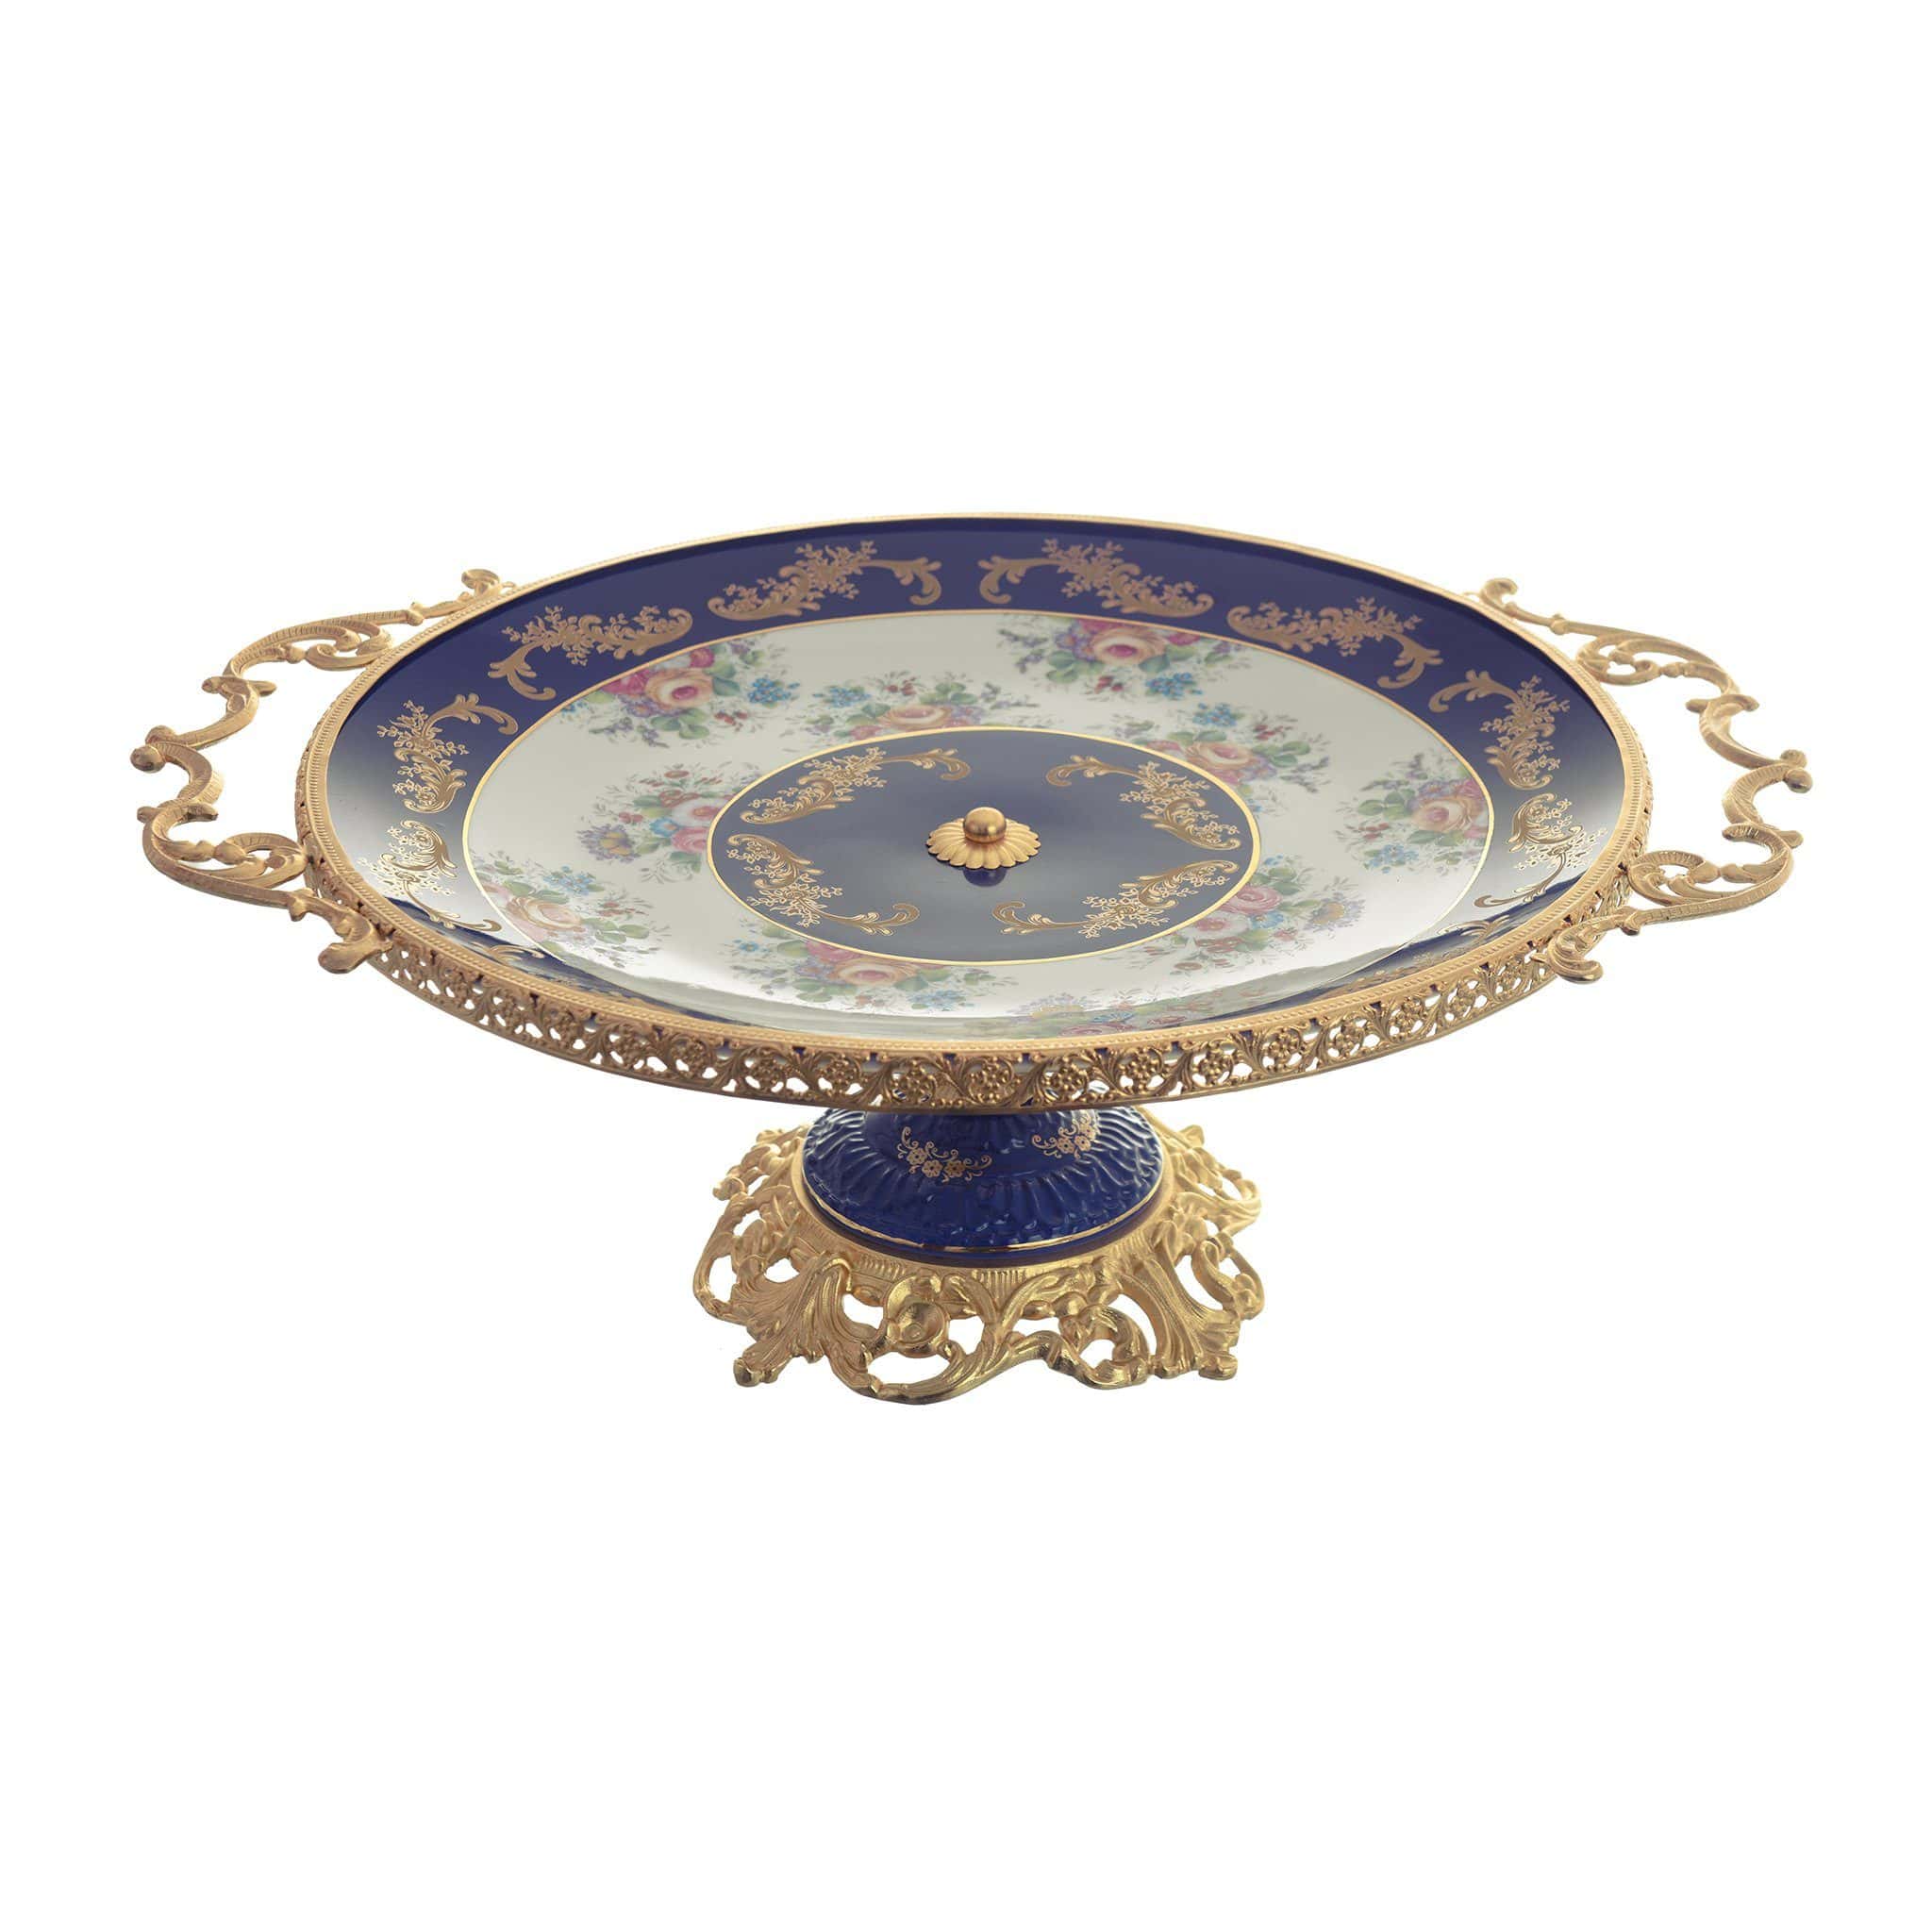 Caroline - Round Plate with Base & Gold Plated Handles - Floral Design - Blue & Gold - 40x50cm - 58000522